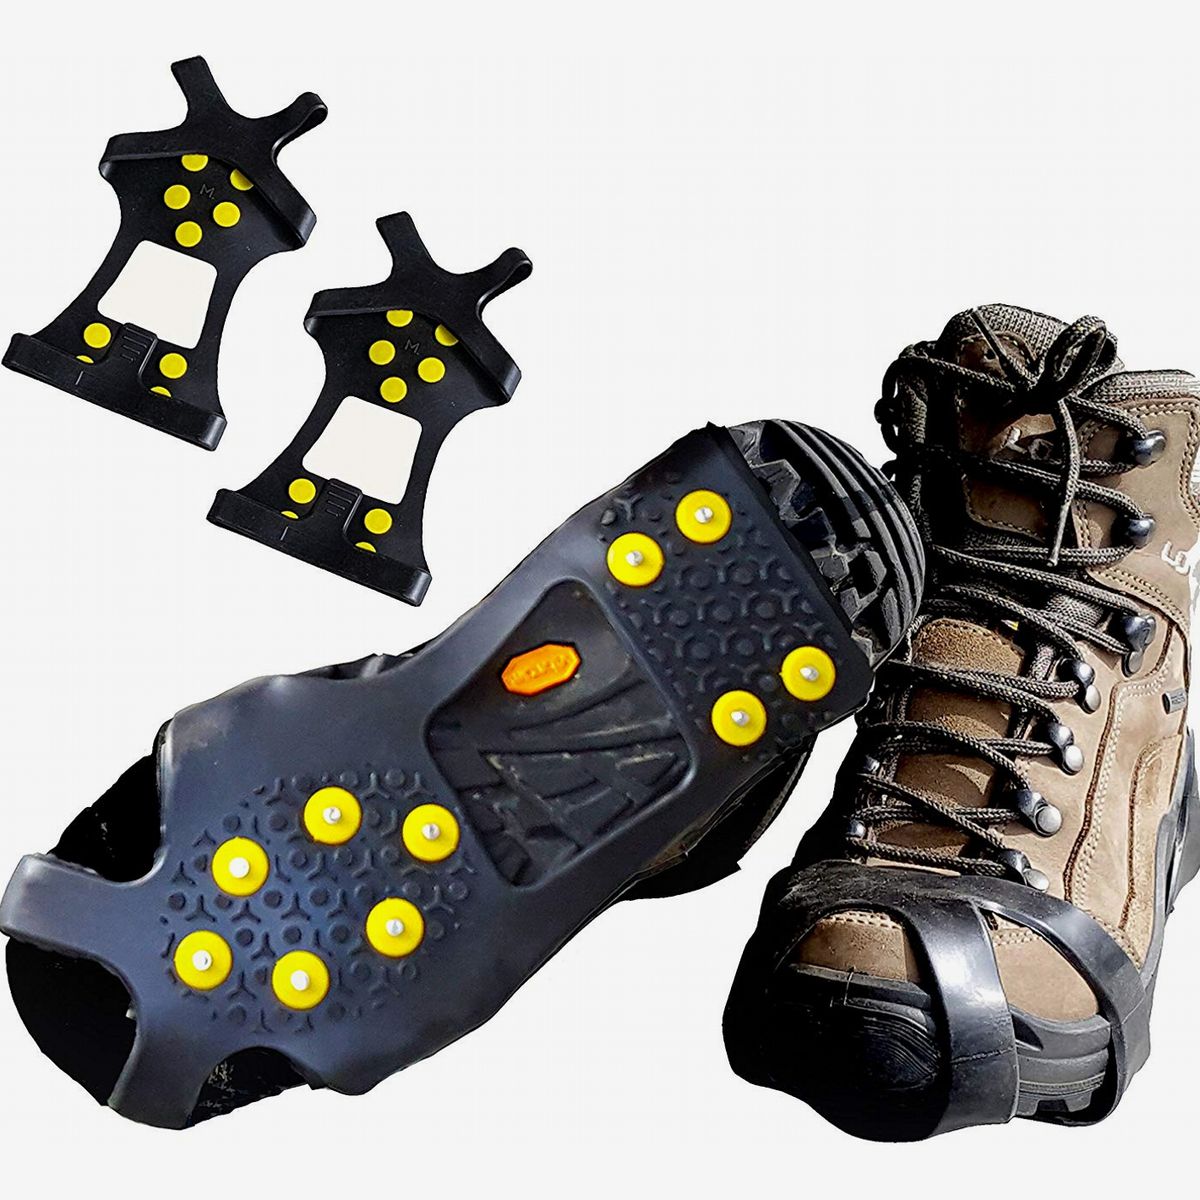 ODIER Shoe Ice Cleats 24 Teeth Ice Grippers 10 Teeth Cleats Shoes Designed for Walk on Ice Snow and Freezing Mud Ground Must Have Accessories for Outdoor Sports Activity Accessory 